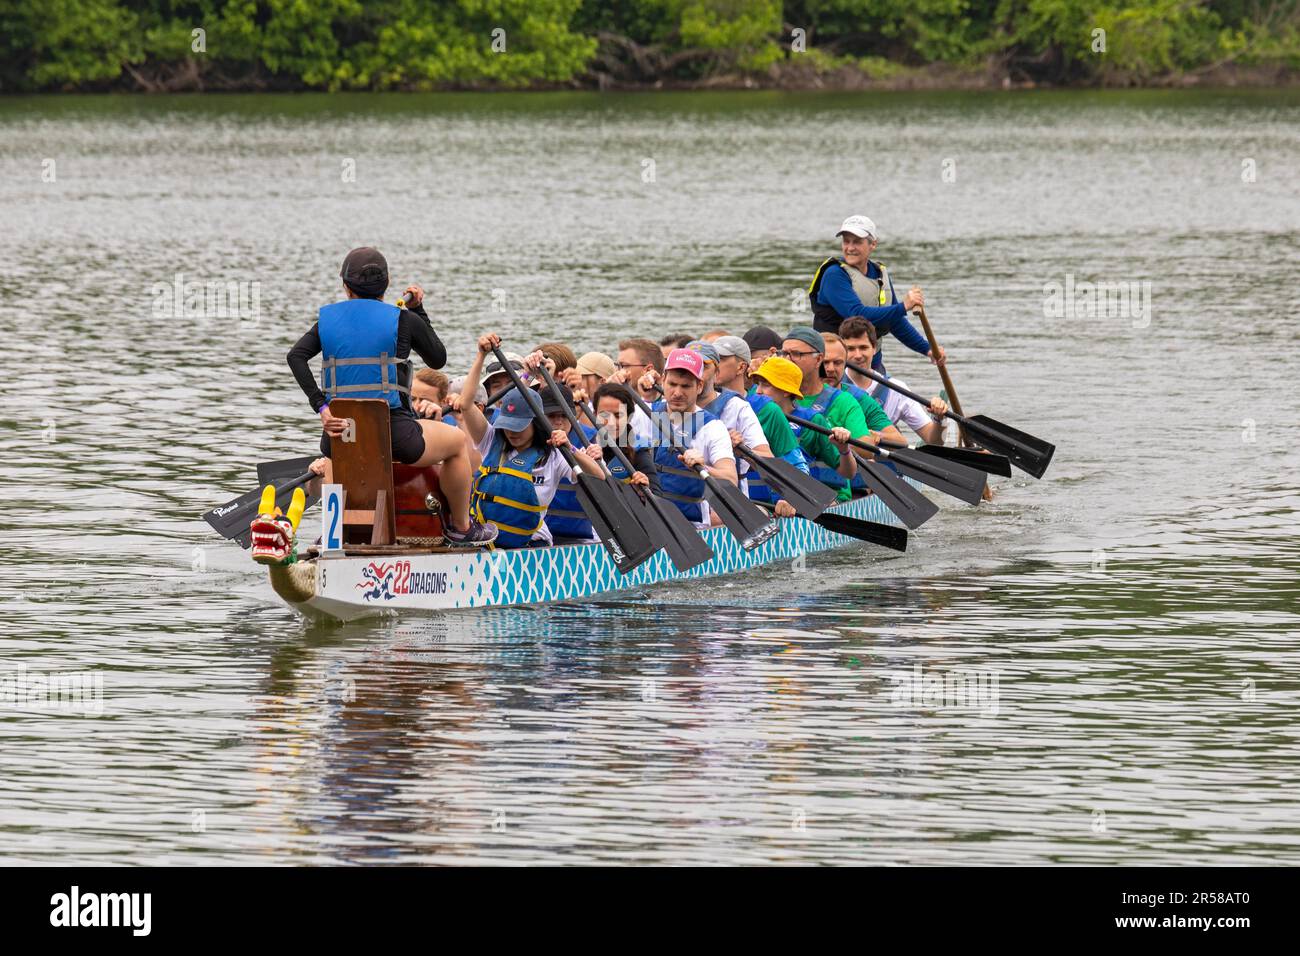 Washington, DC - The DC Dragon Boat Festival on the Potomac River. Dragon boating is a 2300-year-old Chinese tradition. The Washington festival has be Stock Photo